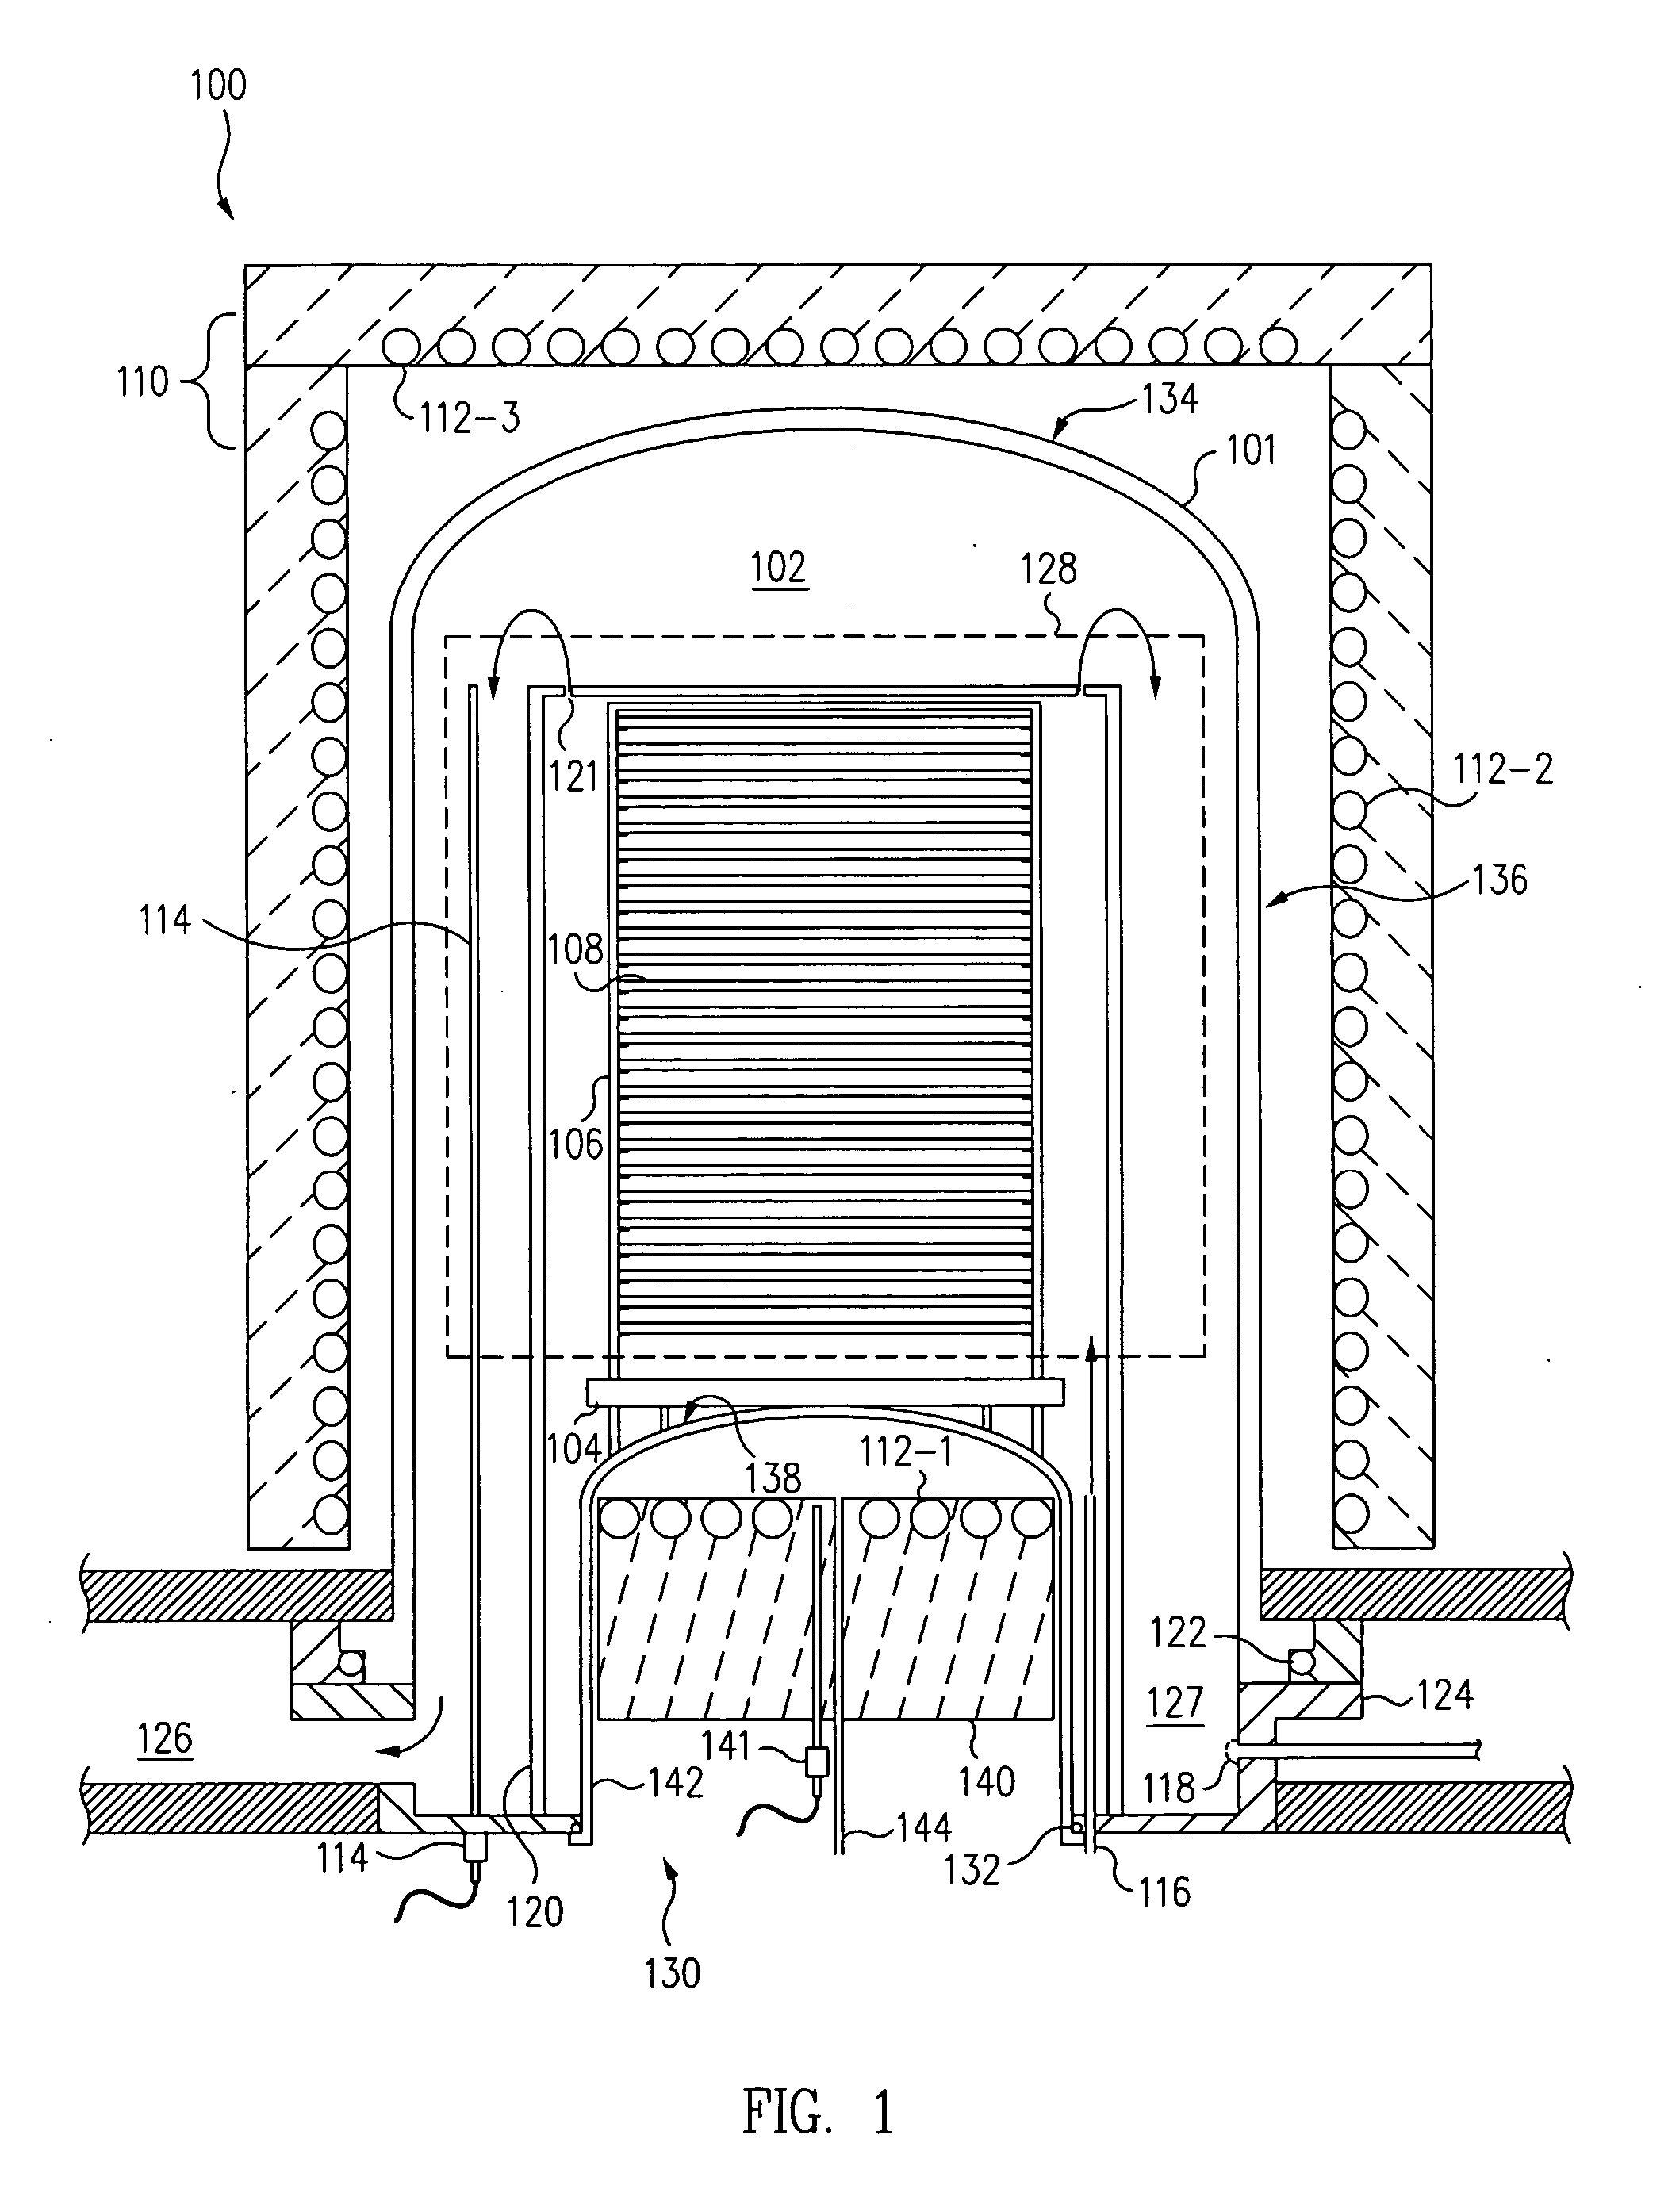 Thermal processing system with cross flow injection system with rotatable injectors